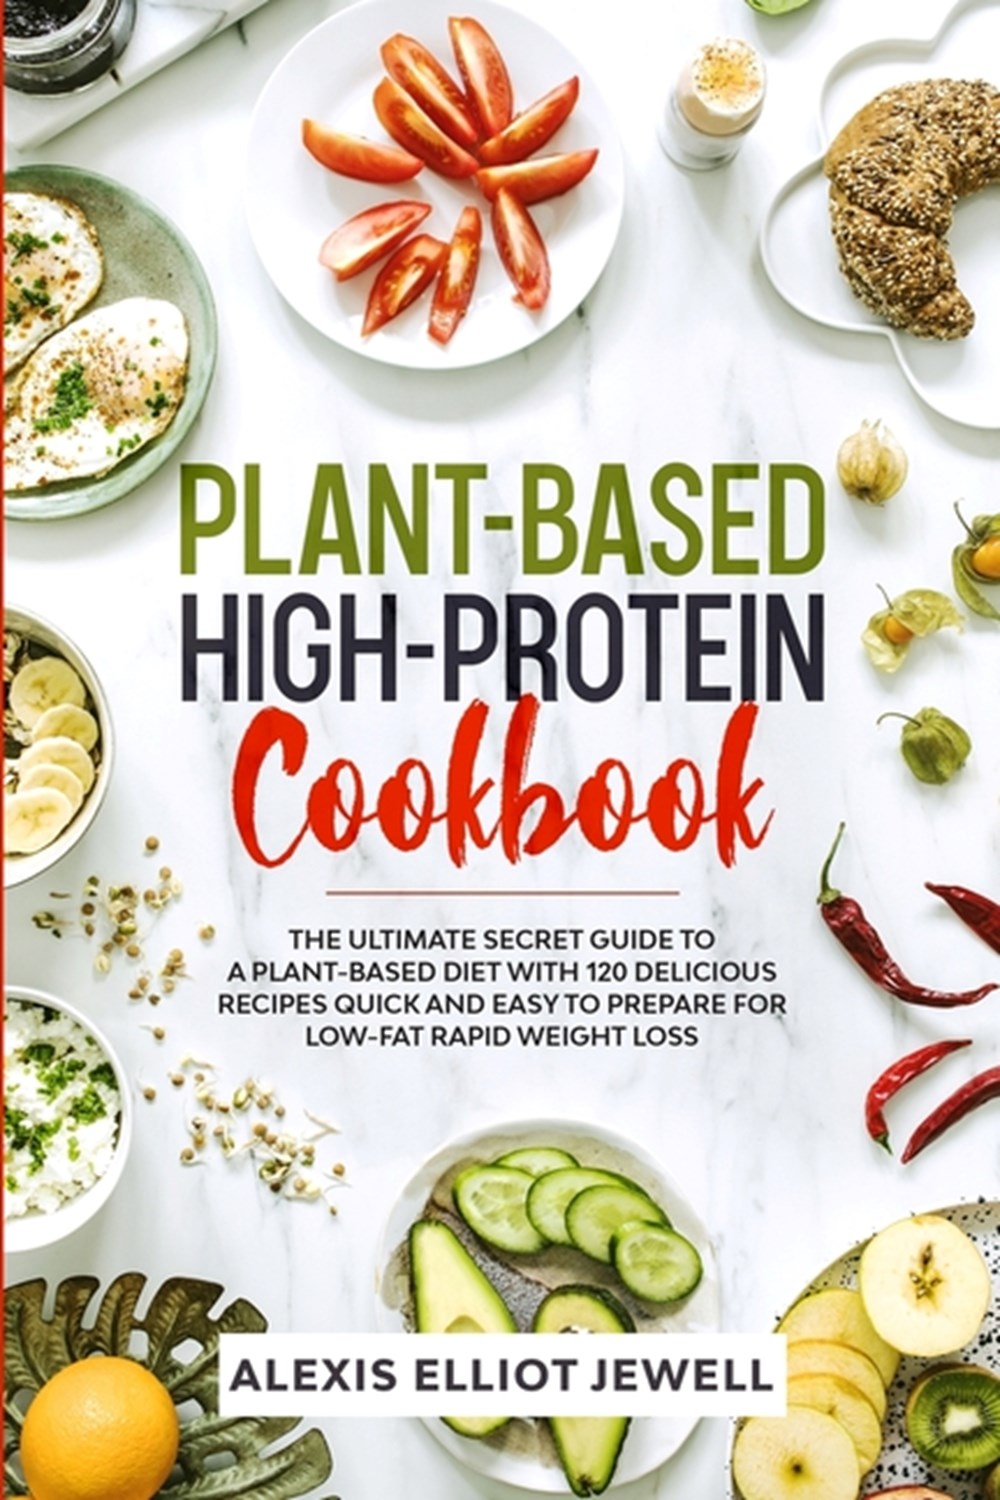 Buy Plant-Based High-Protein Cookbook by Alexis Elliot Jewell, Antony ...